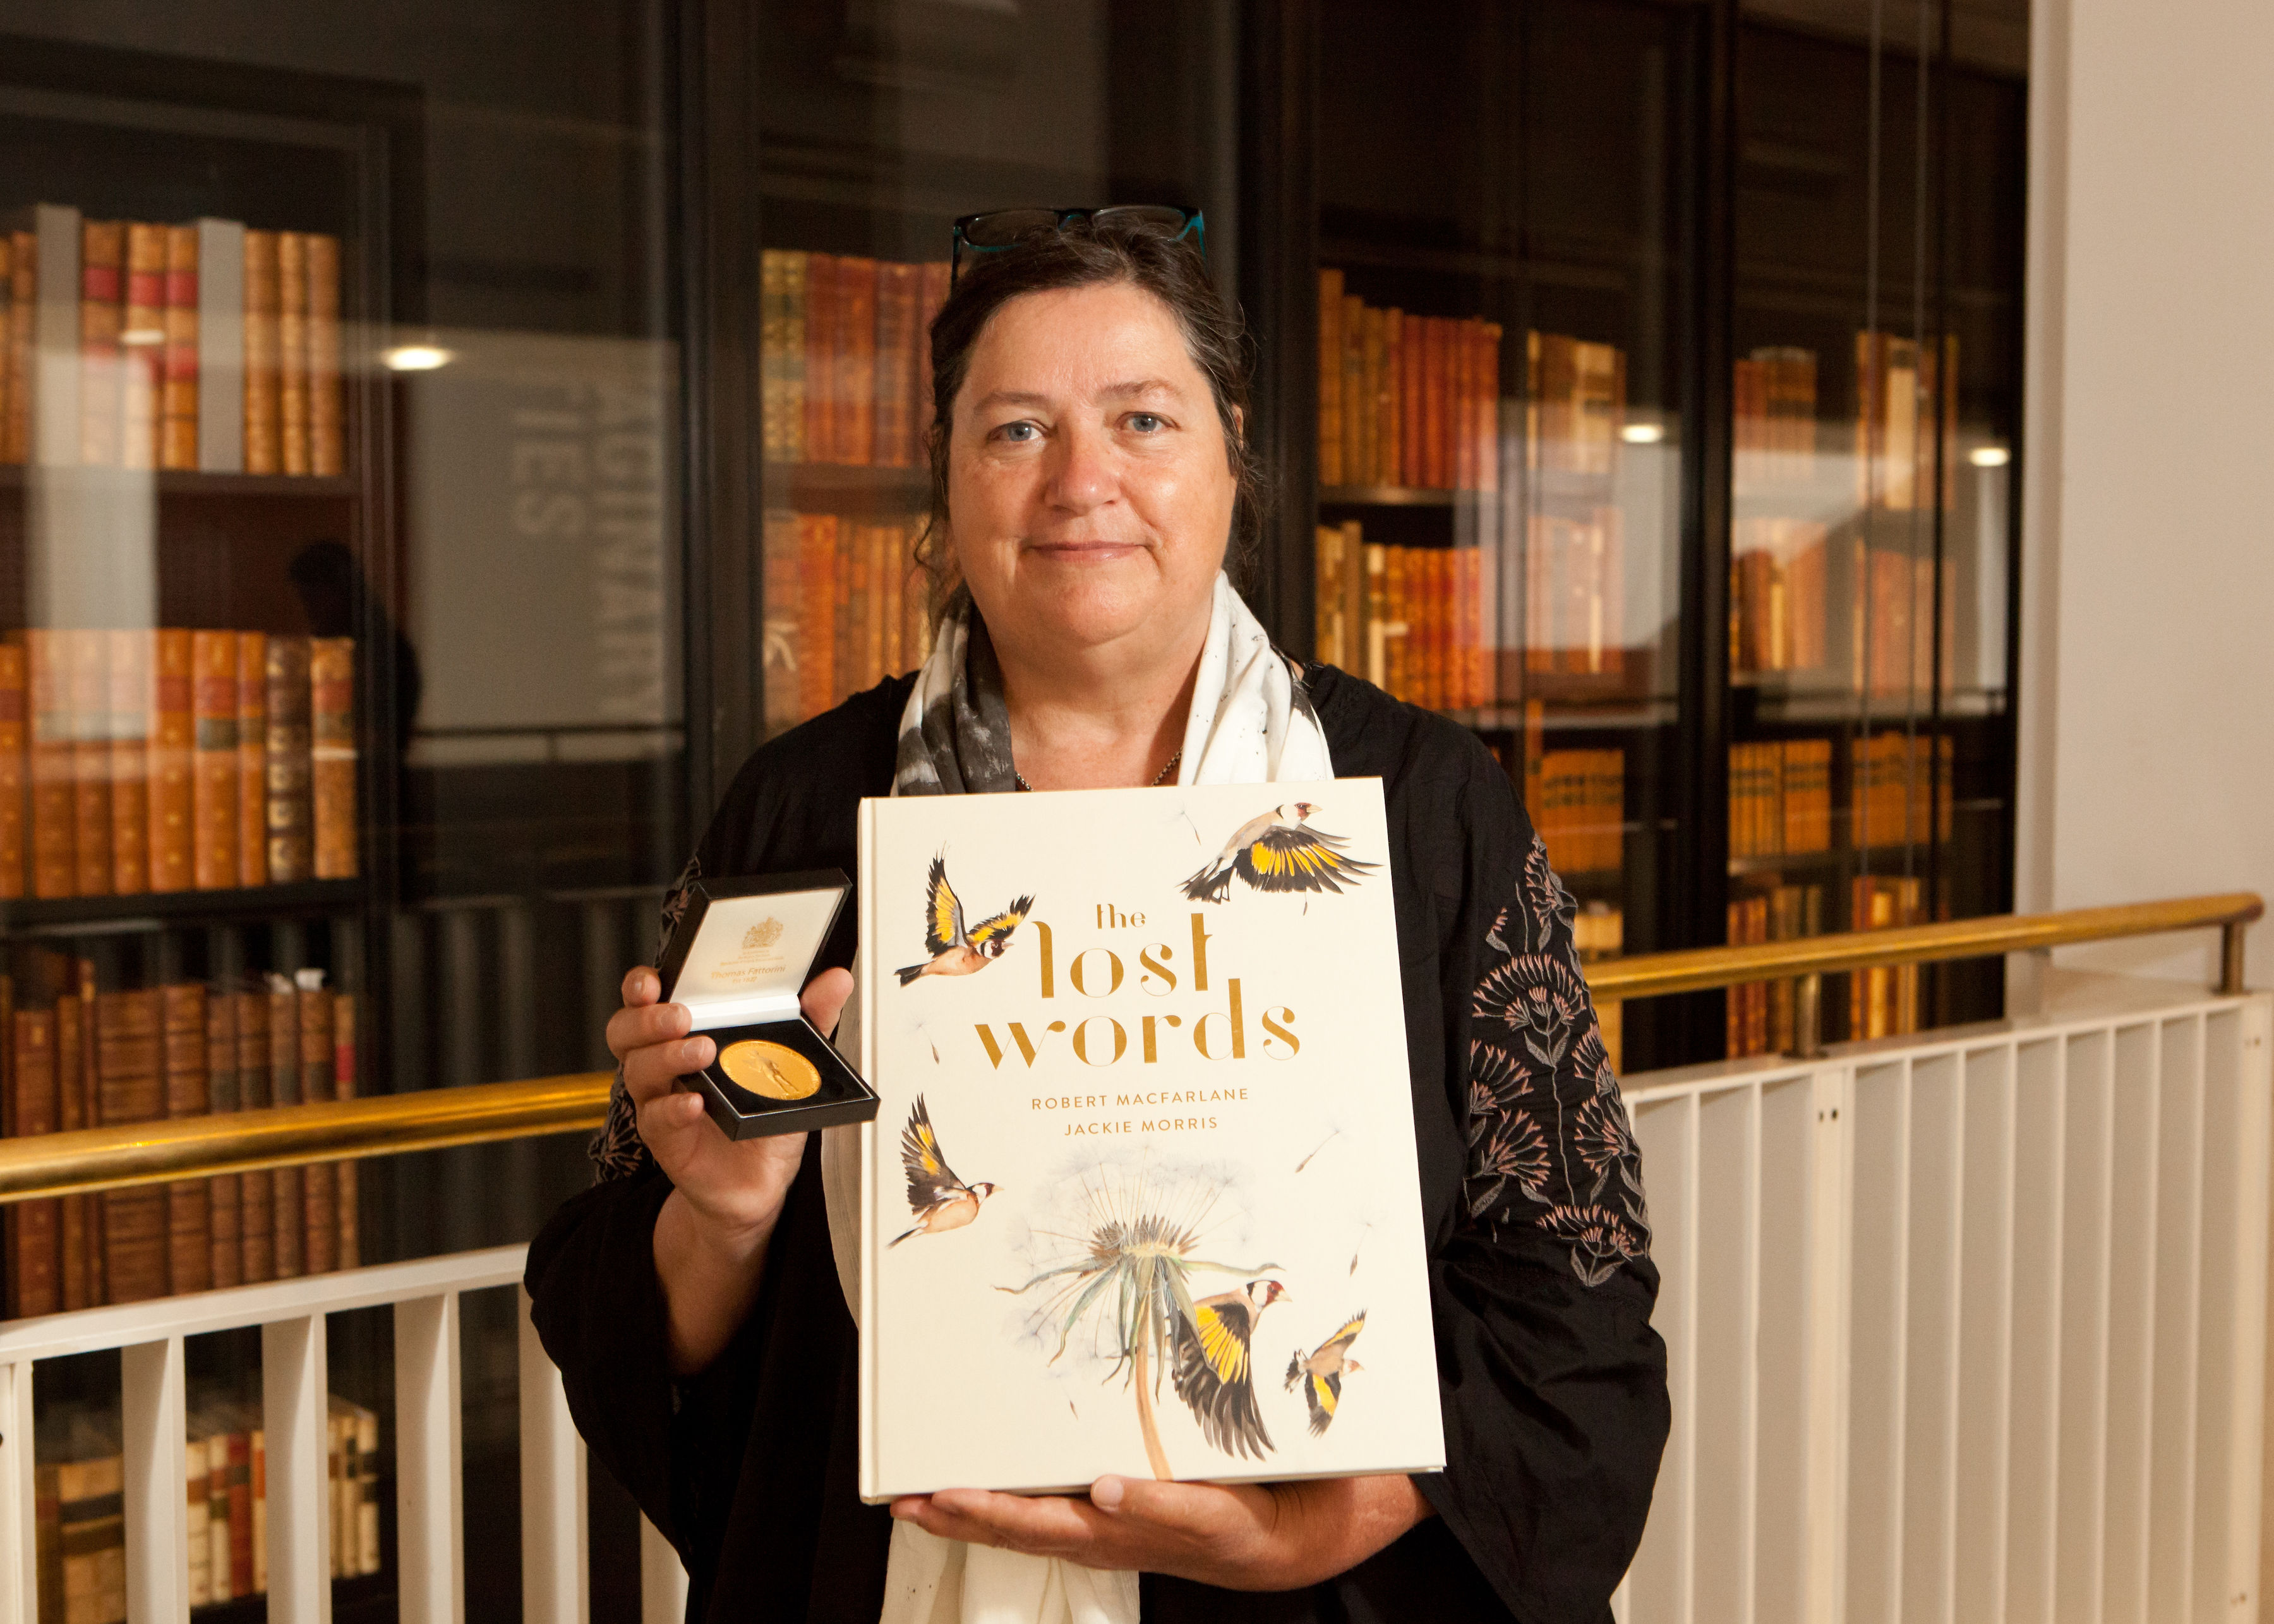 Jackie Morris with her book 'The Lost Words' and the CILIP Kate Greenaway Medal